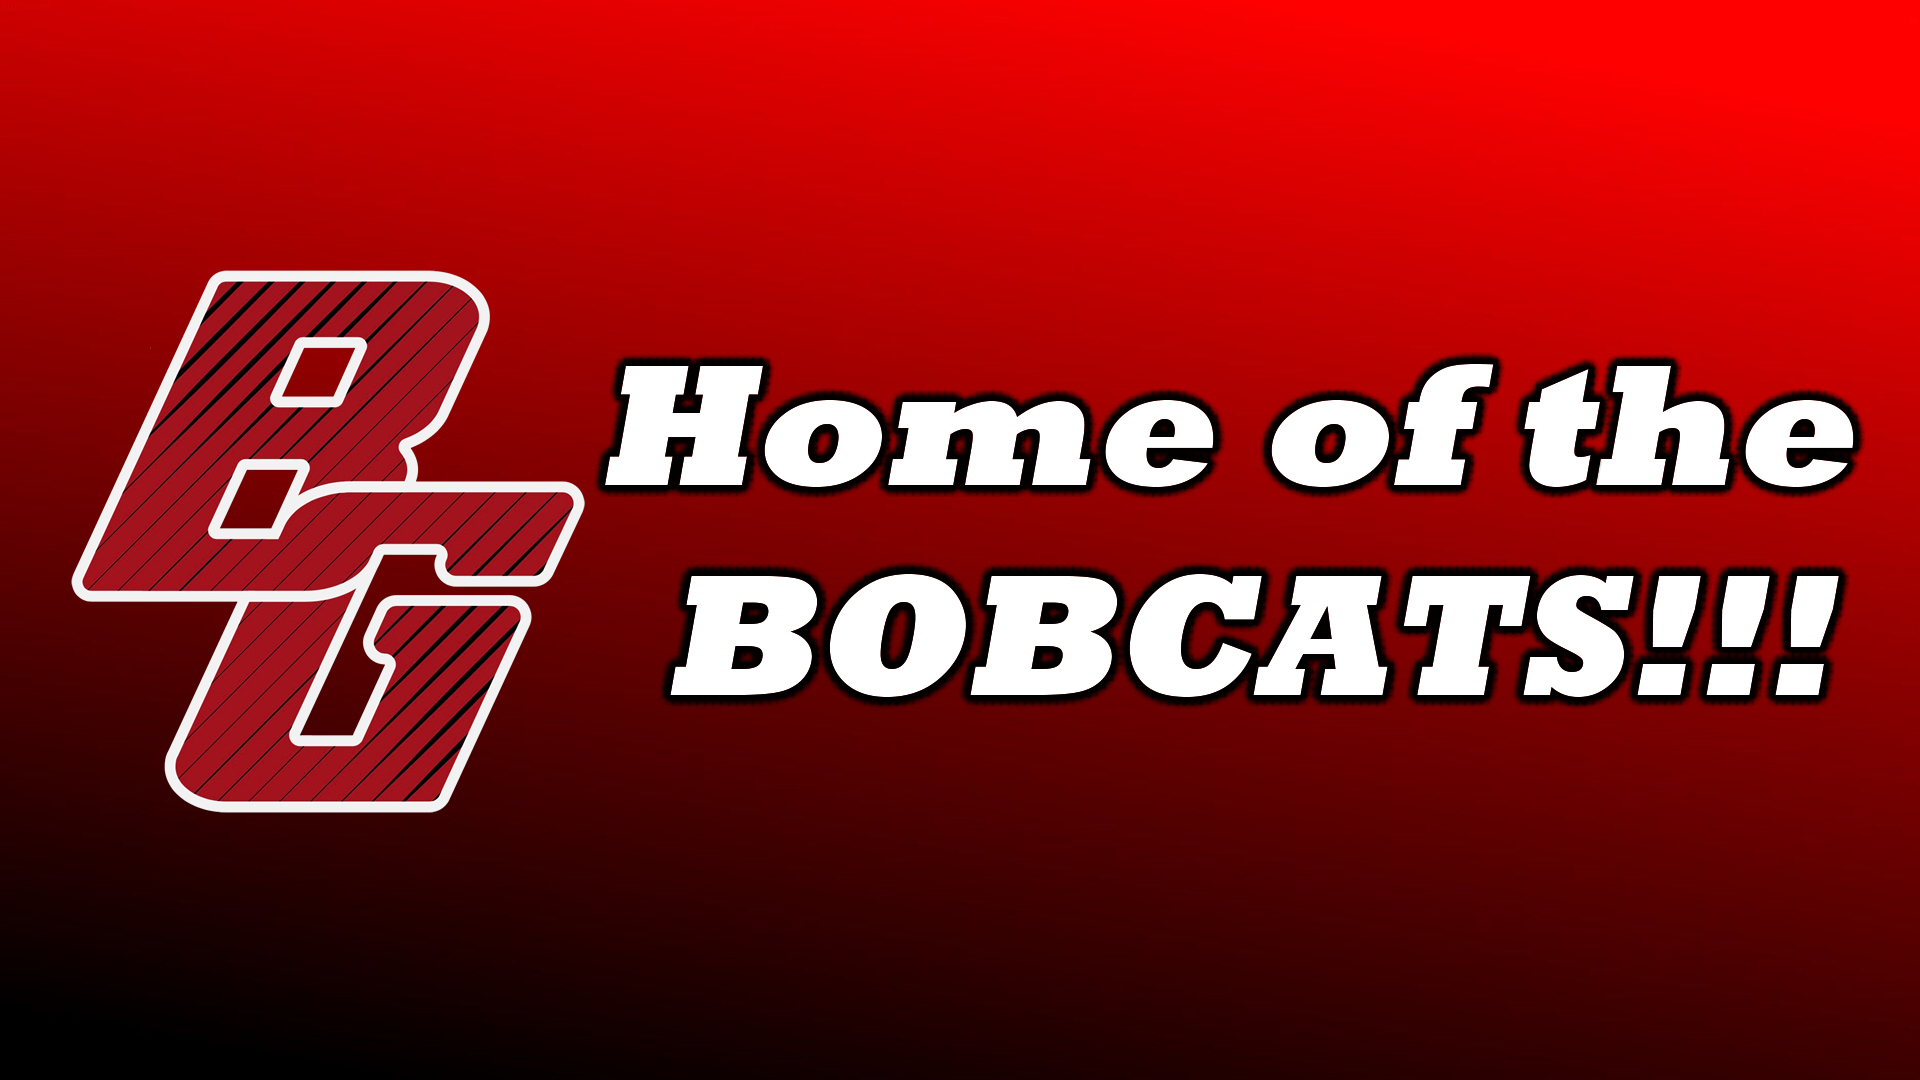 Home of the Bobcats!